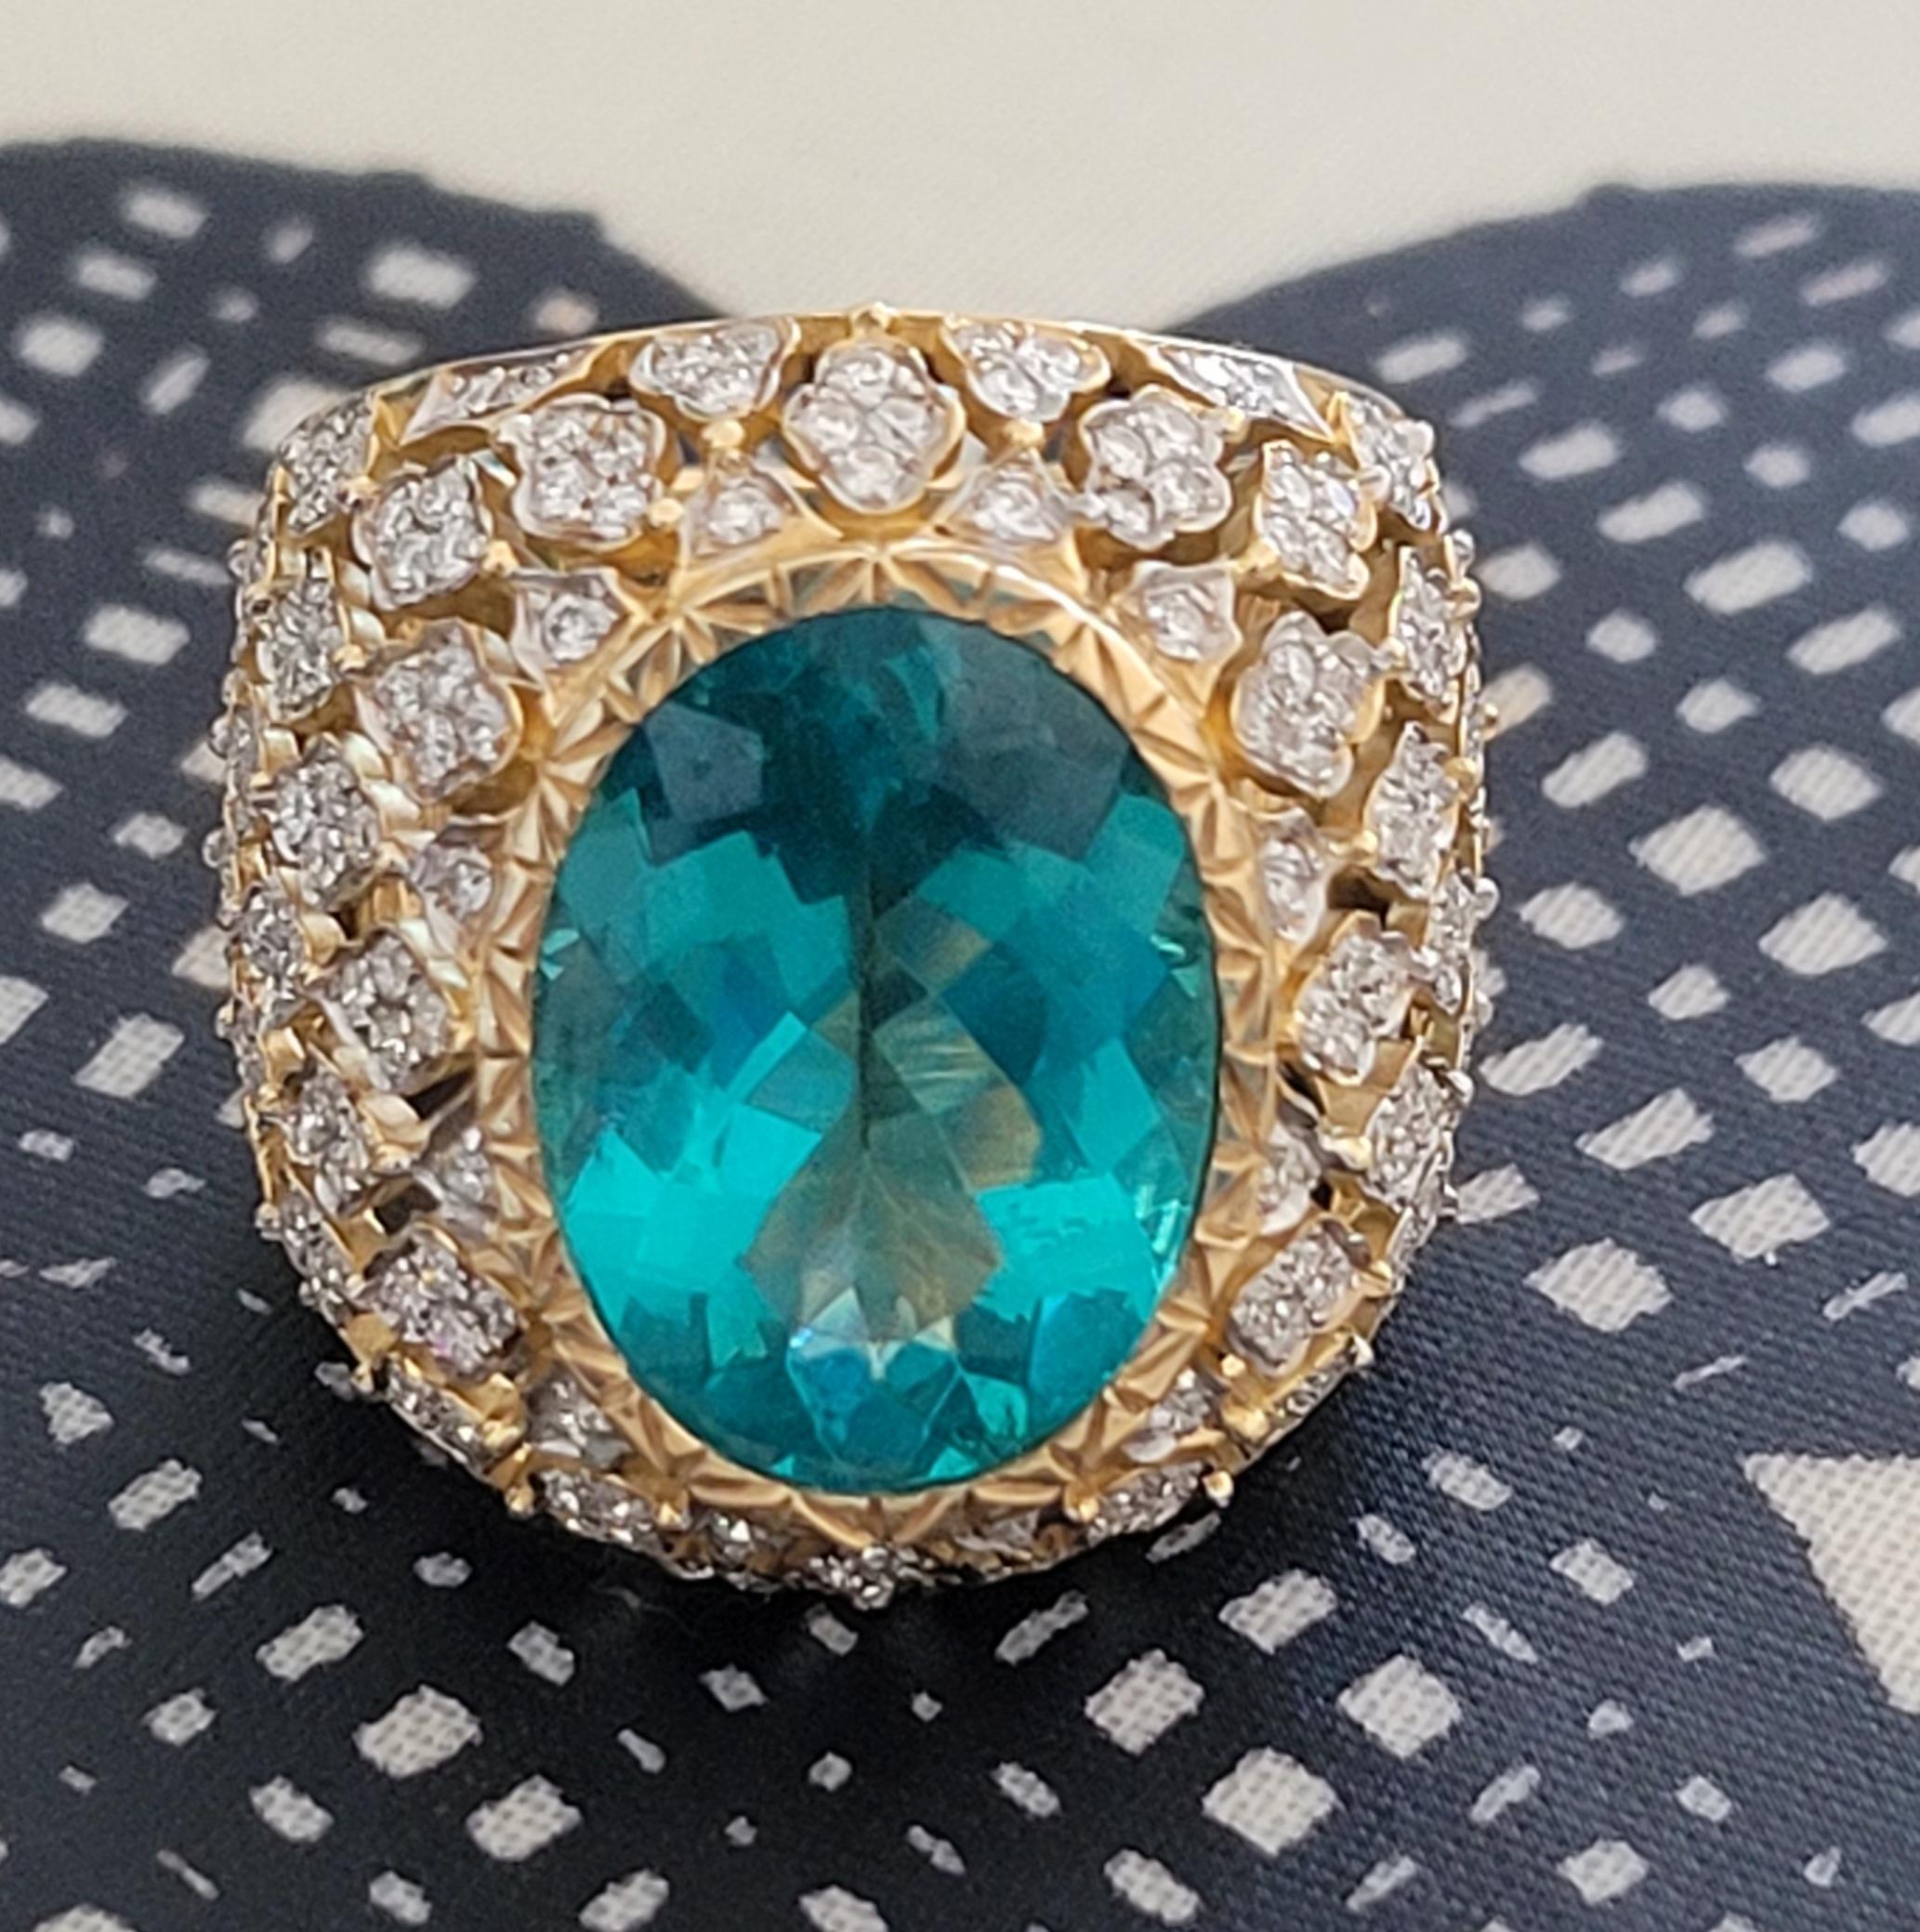 APATITE PARAIBA RING

very special exquisite one a of kind Majestic Ring

248 ROUND DIAMONDS - 1.47 CT
1 APATITE STONE - 8.40 CT
18K YELLOW GOLD - 13.06 GM
SIZE US 8.0 